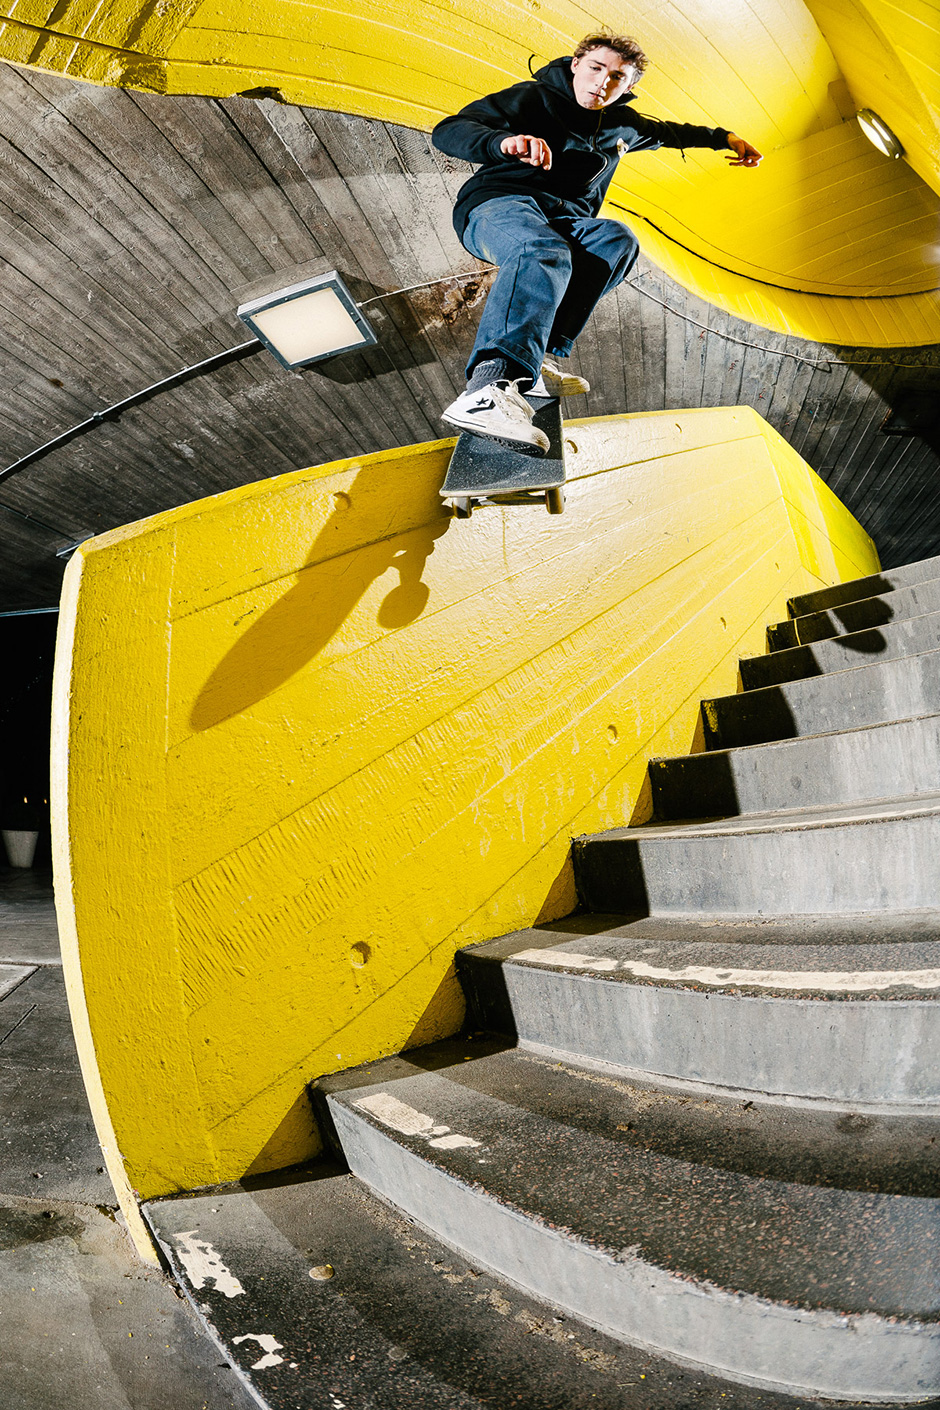 Rory Milanes back smiths the canary yellow incarnation of this hubba. Sidewalk January 2013. Photo: Sam Ashley